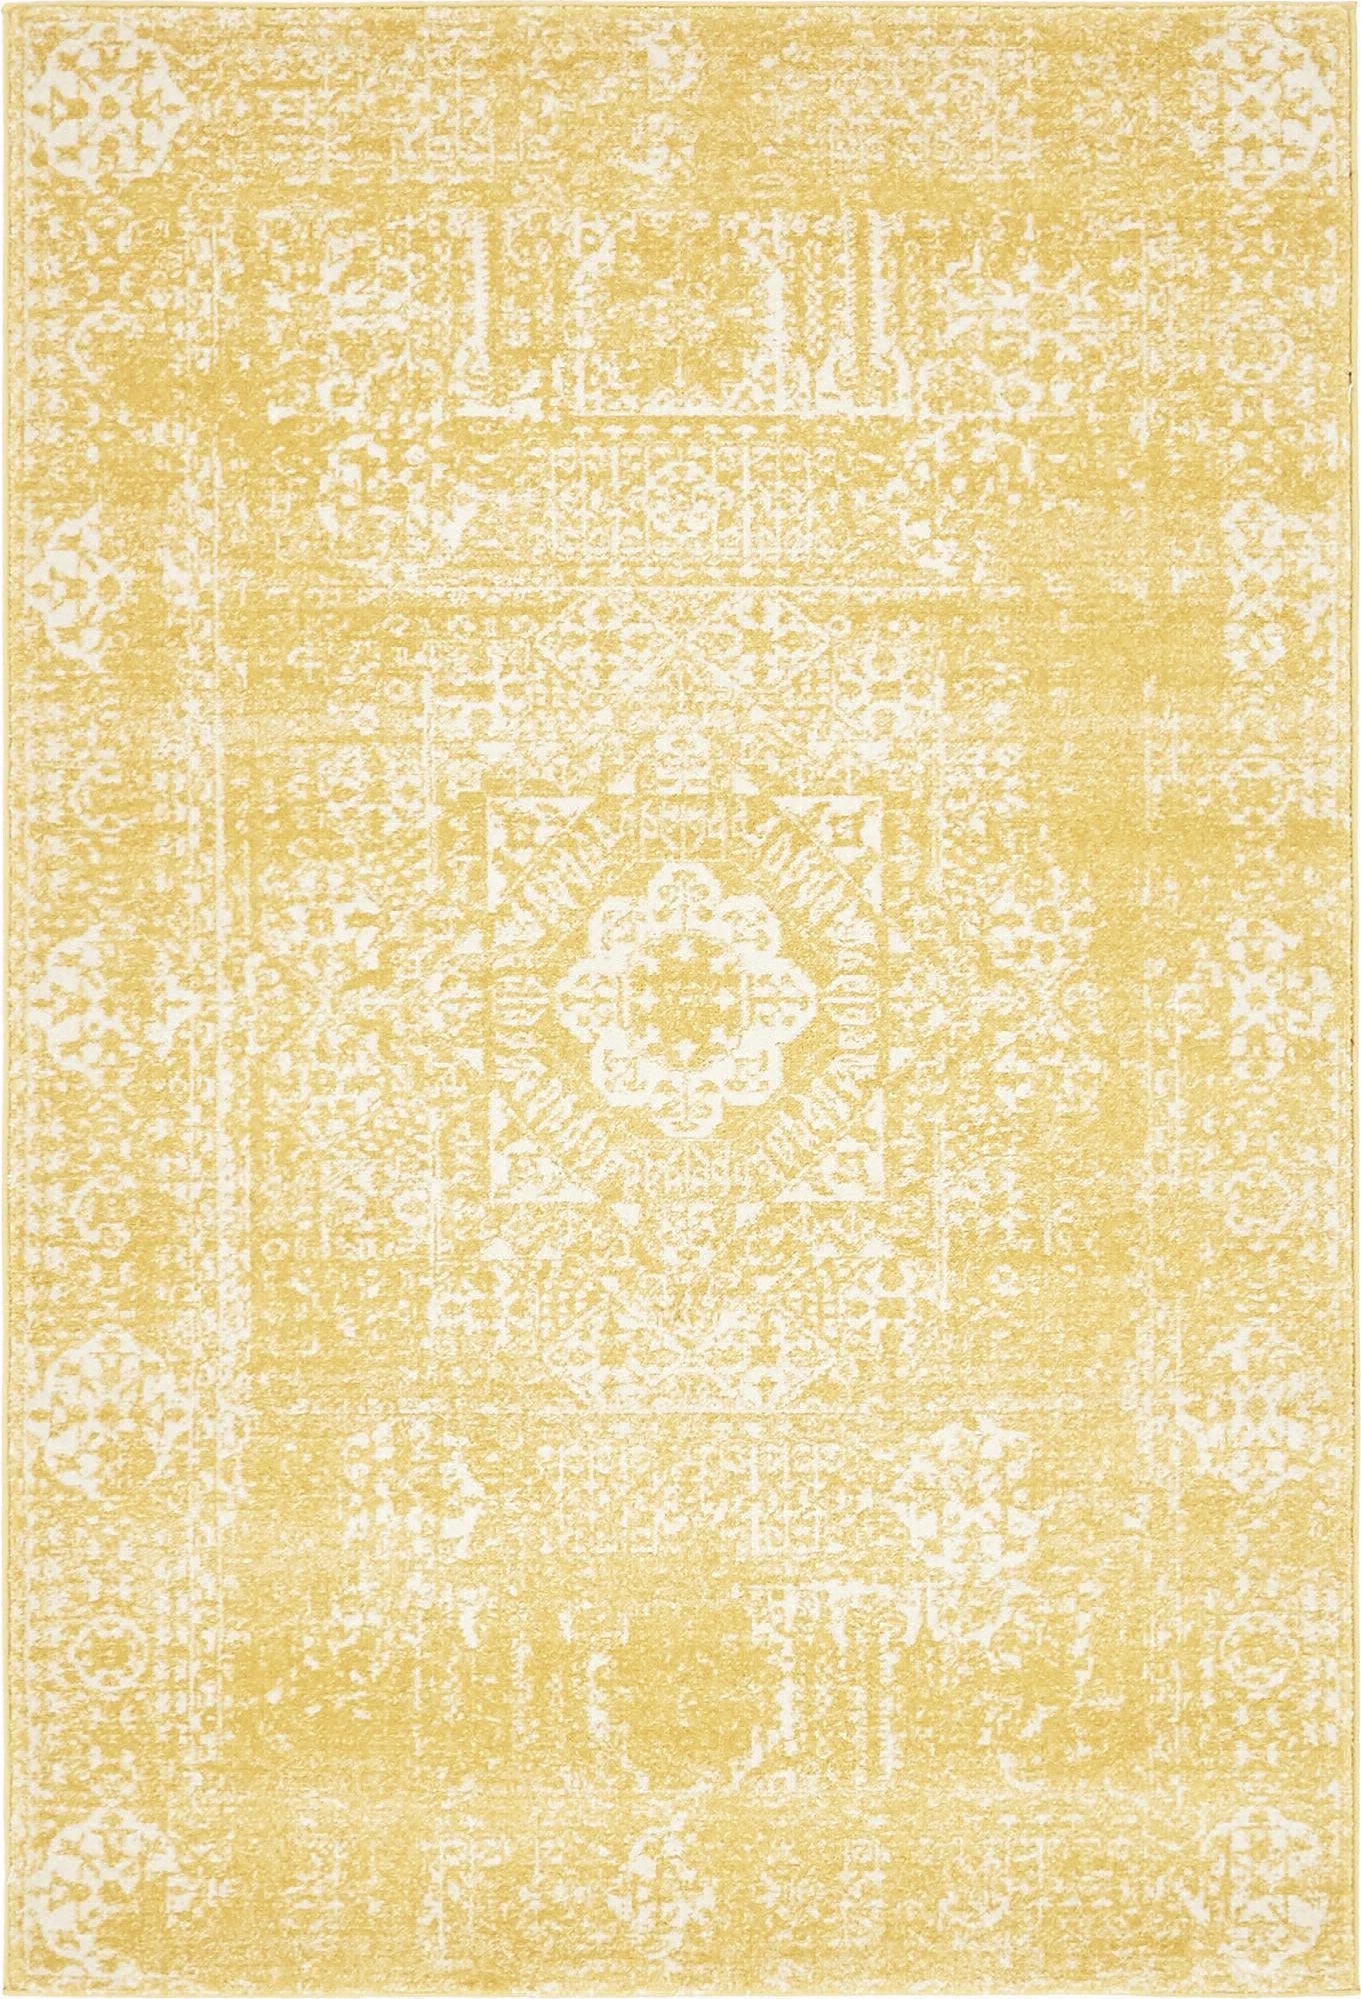 Unique Loom Tradition T-HERITAGE-5216B Yellow Area Rug main image